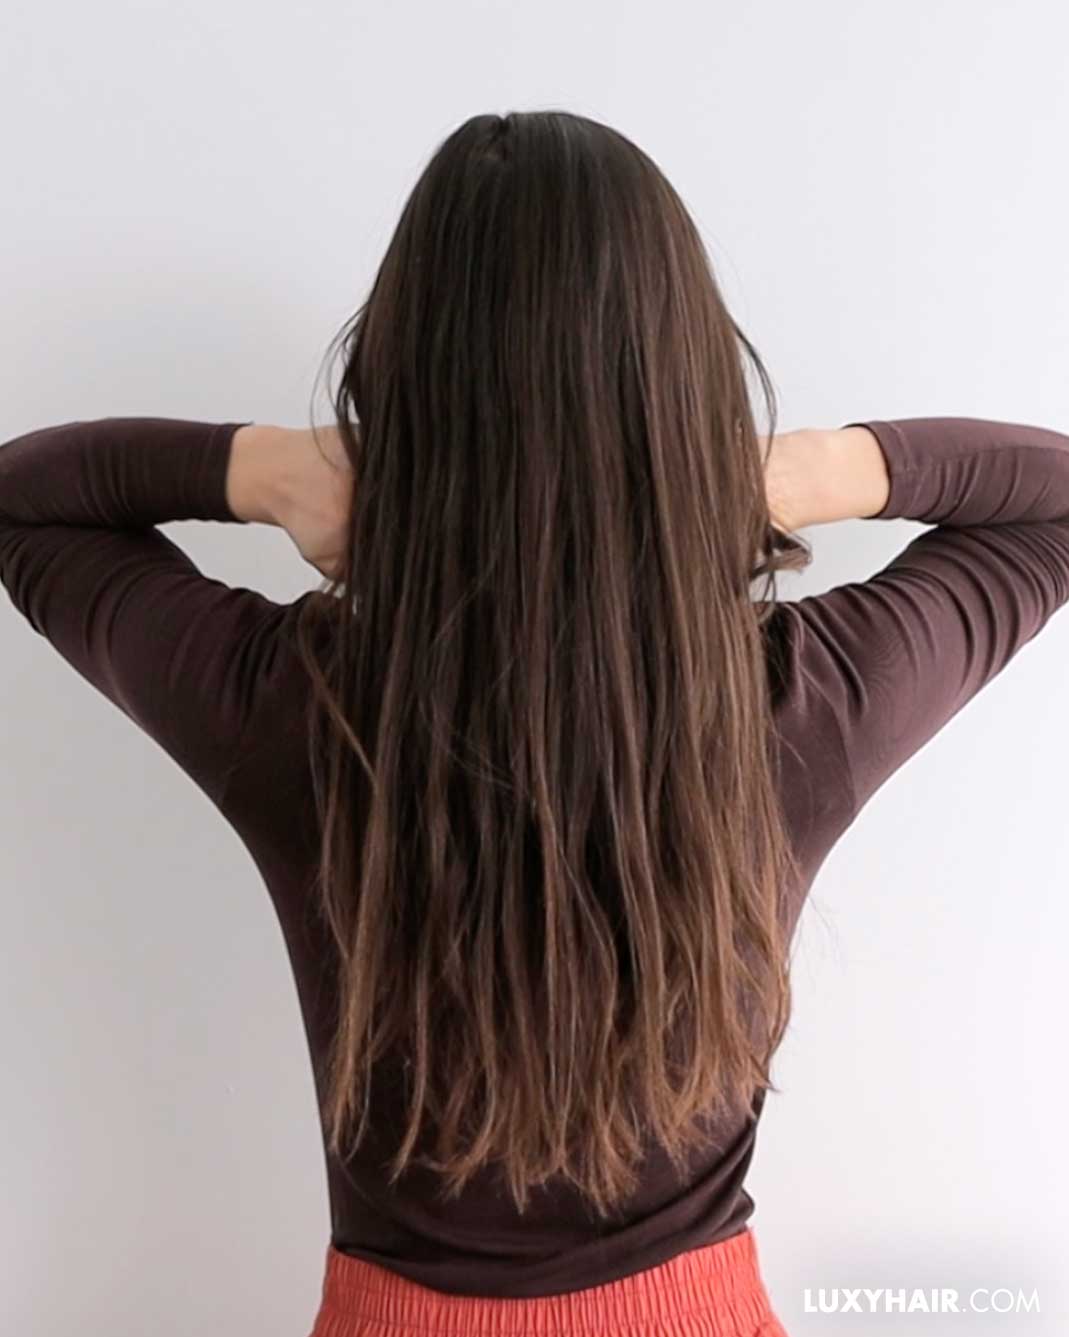 Long Wavy Hair: How To Achieve Perfect Long Wavy Hairstyles - Luxy® Hair